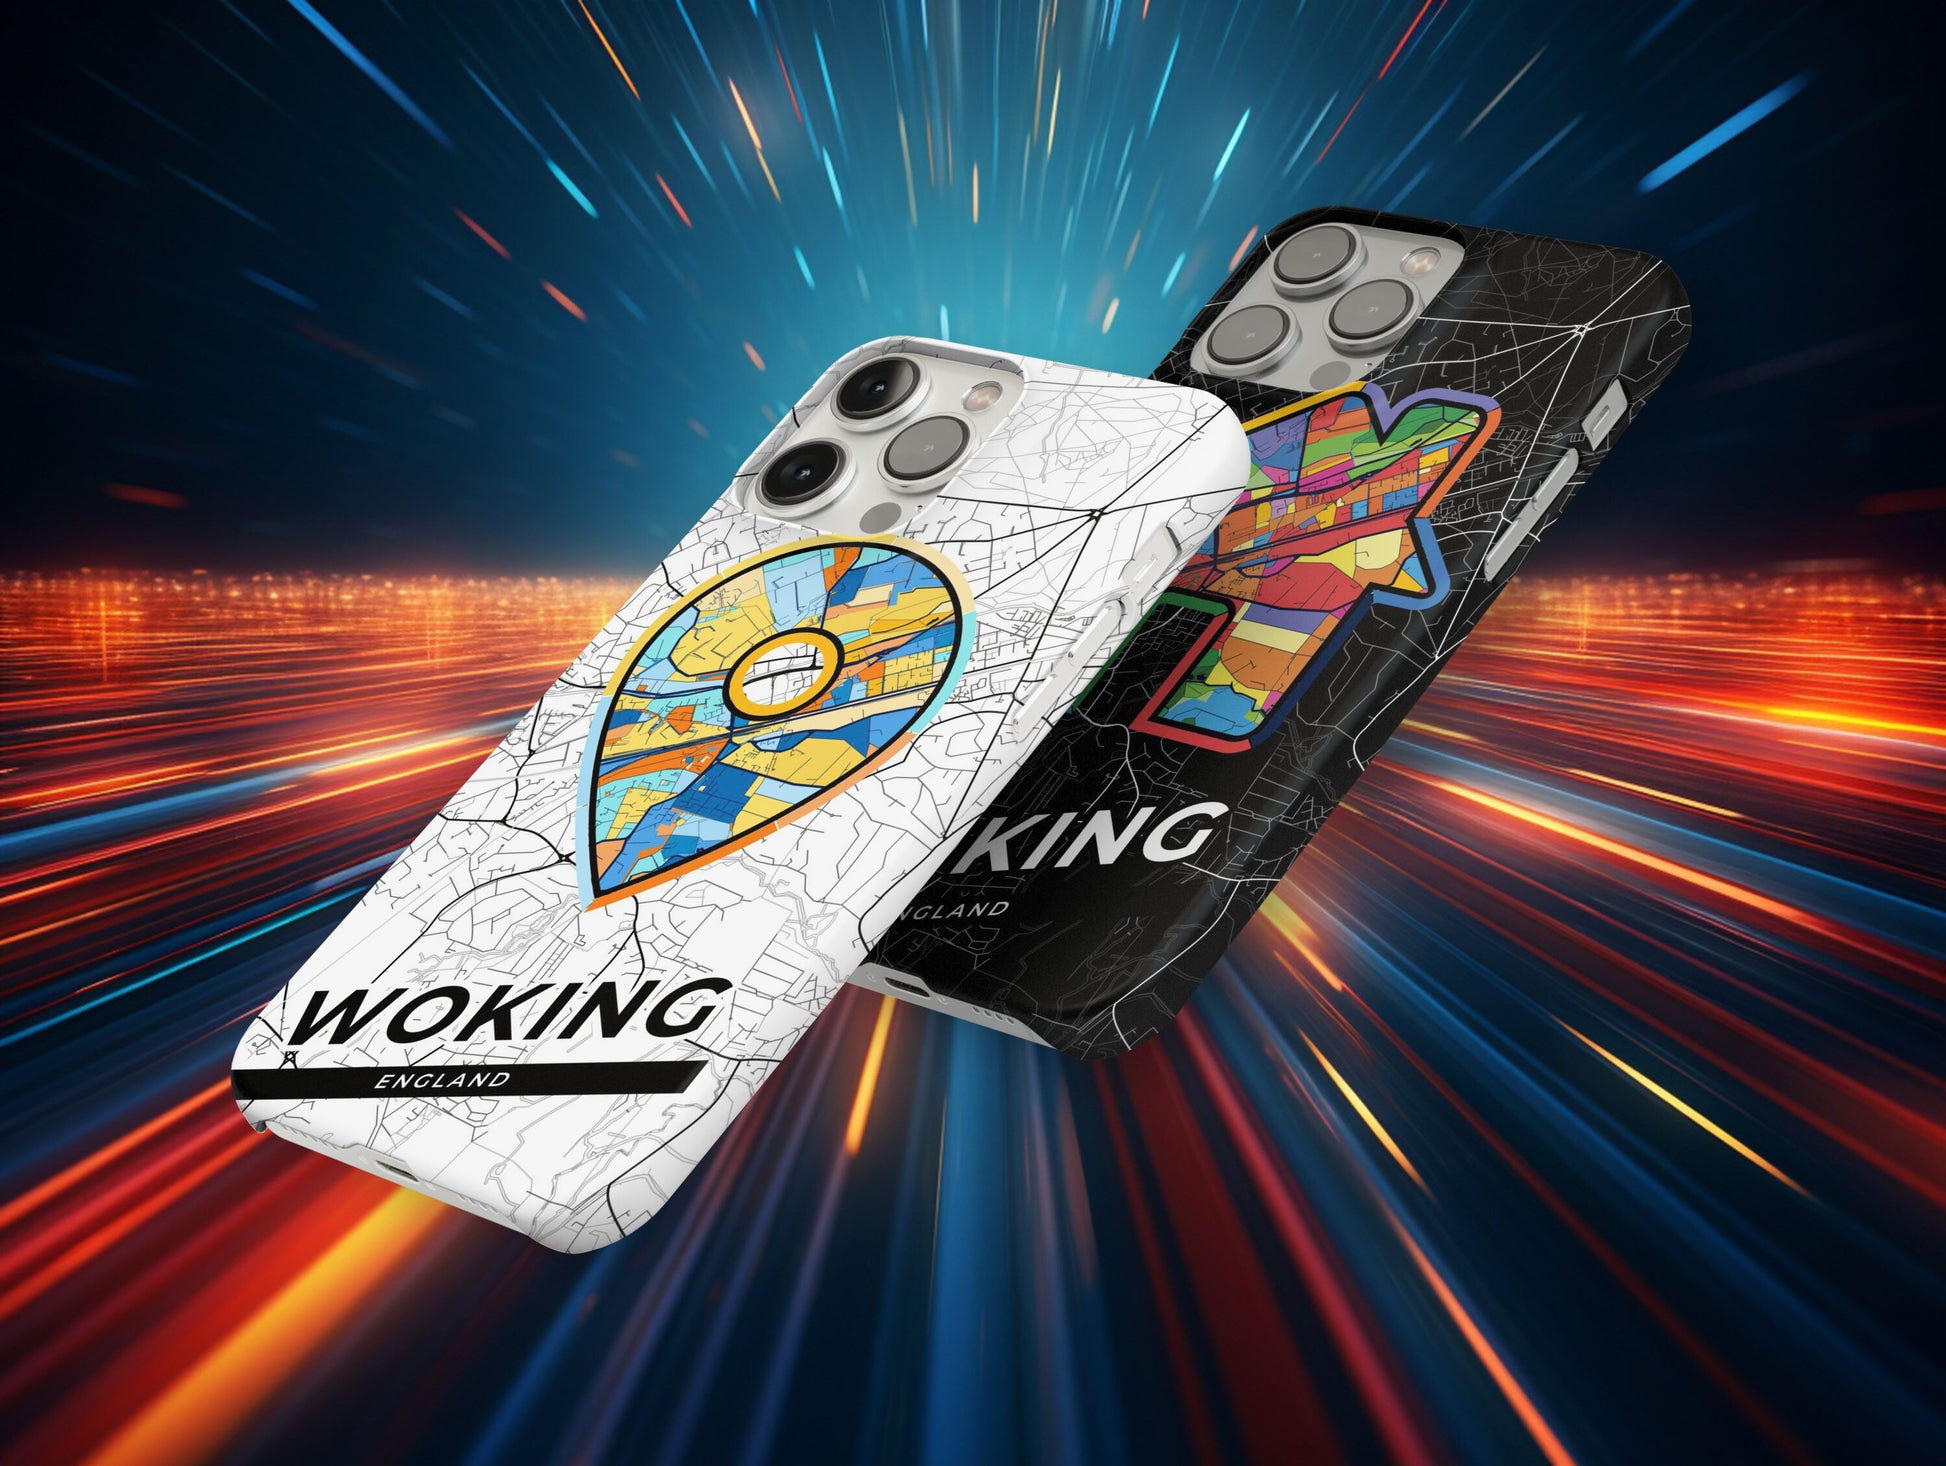 Woking England slim phone case with colorful icon